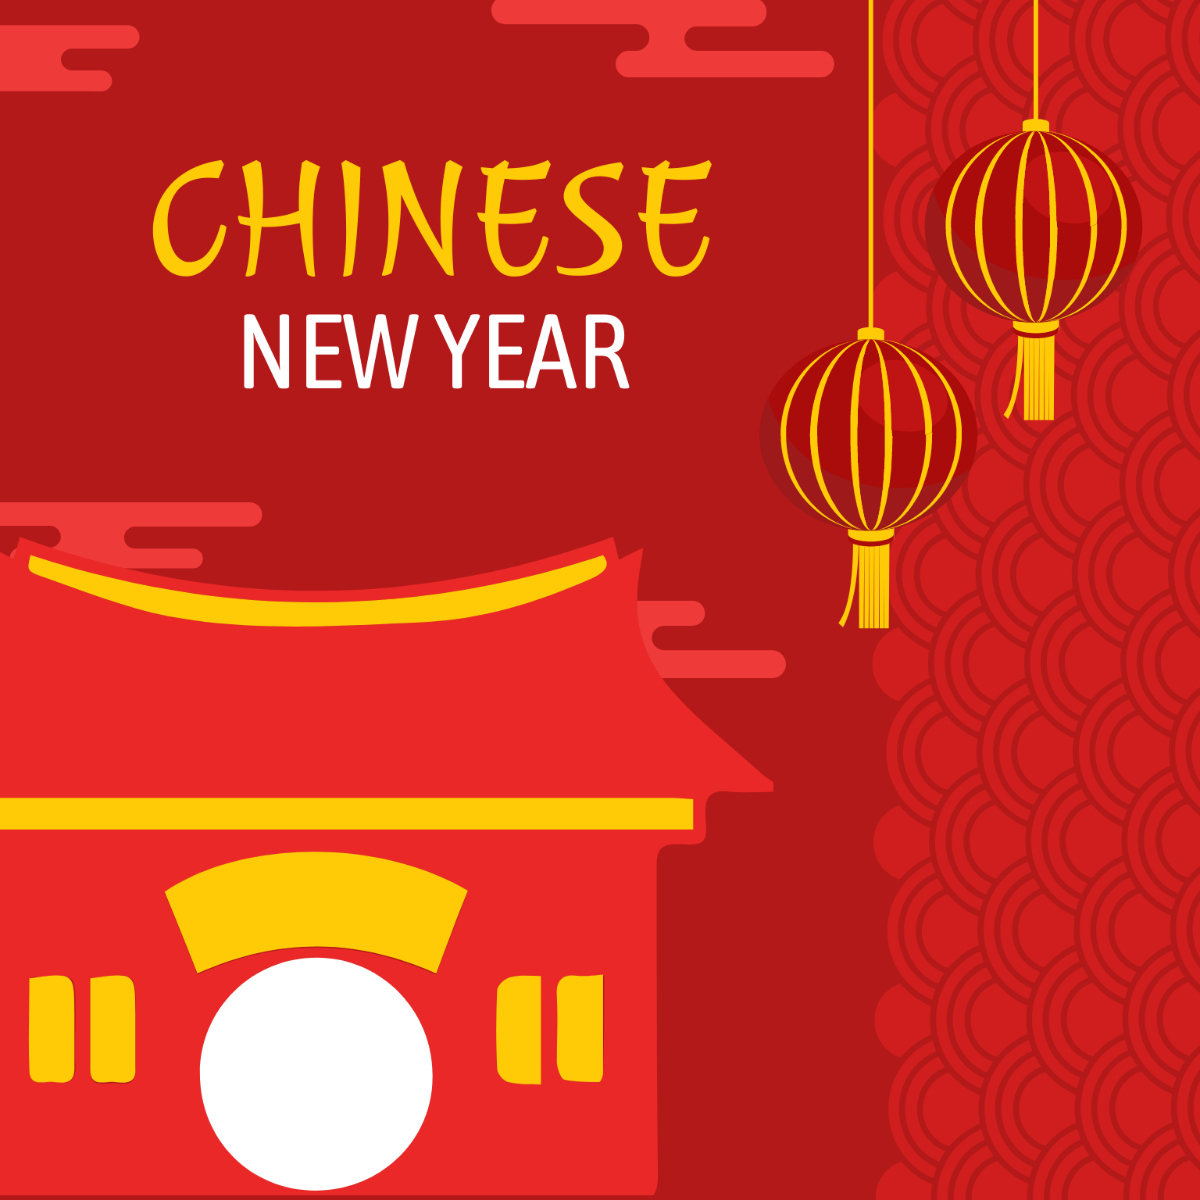 Chinese New Year Illustration Template